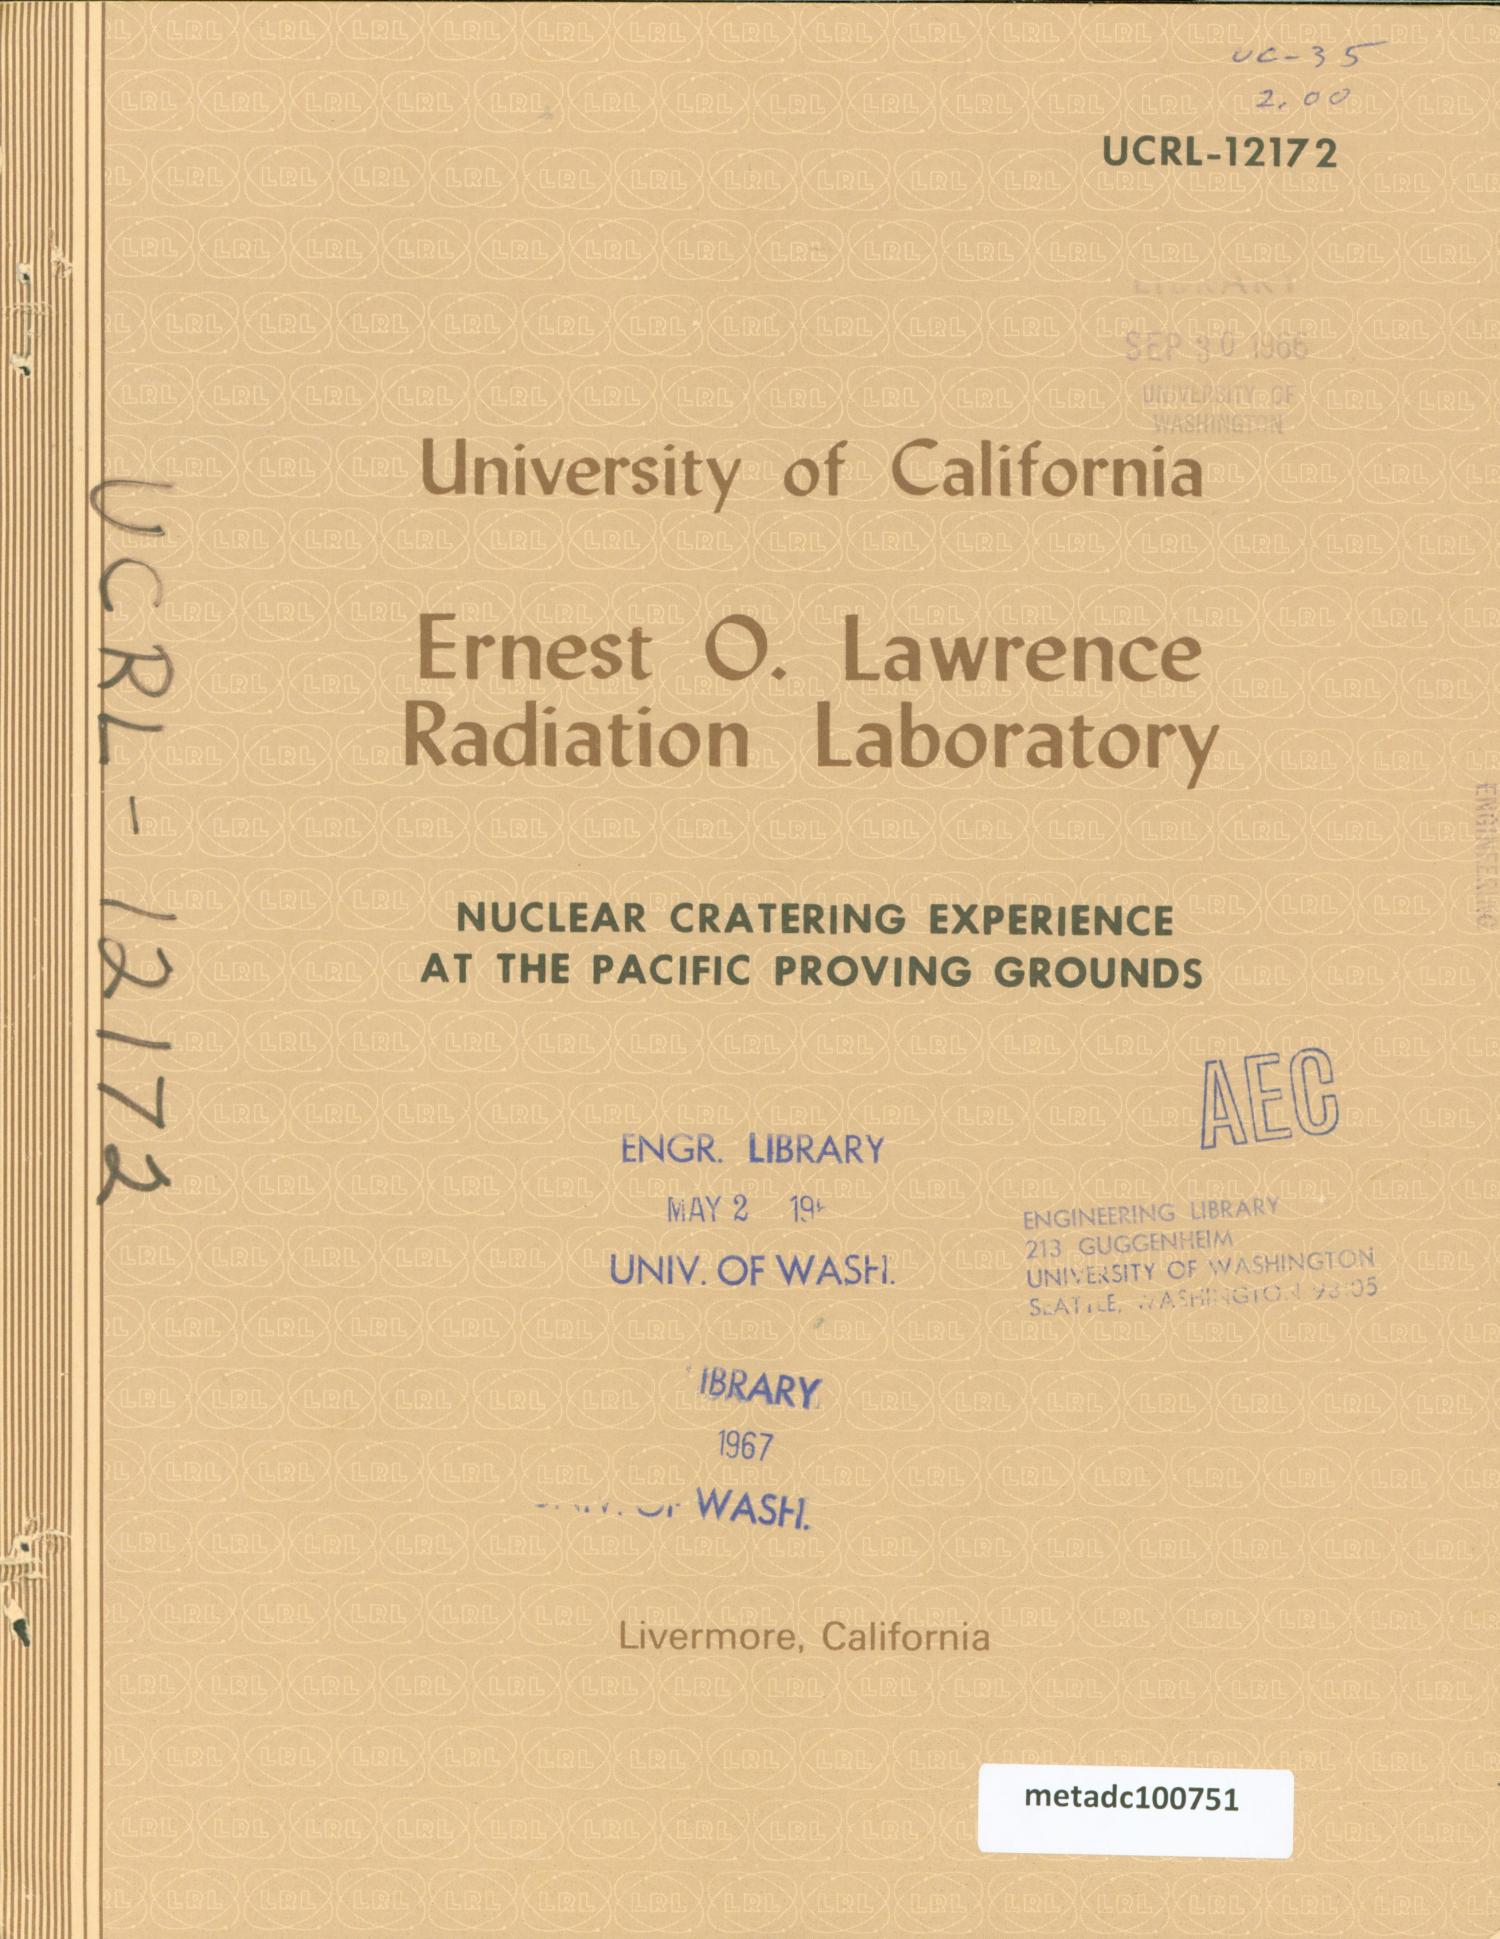 Nuclear Cratering Experience at the Pacific Proving Grounds
                                                
                                                    Front Cover
                                                